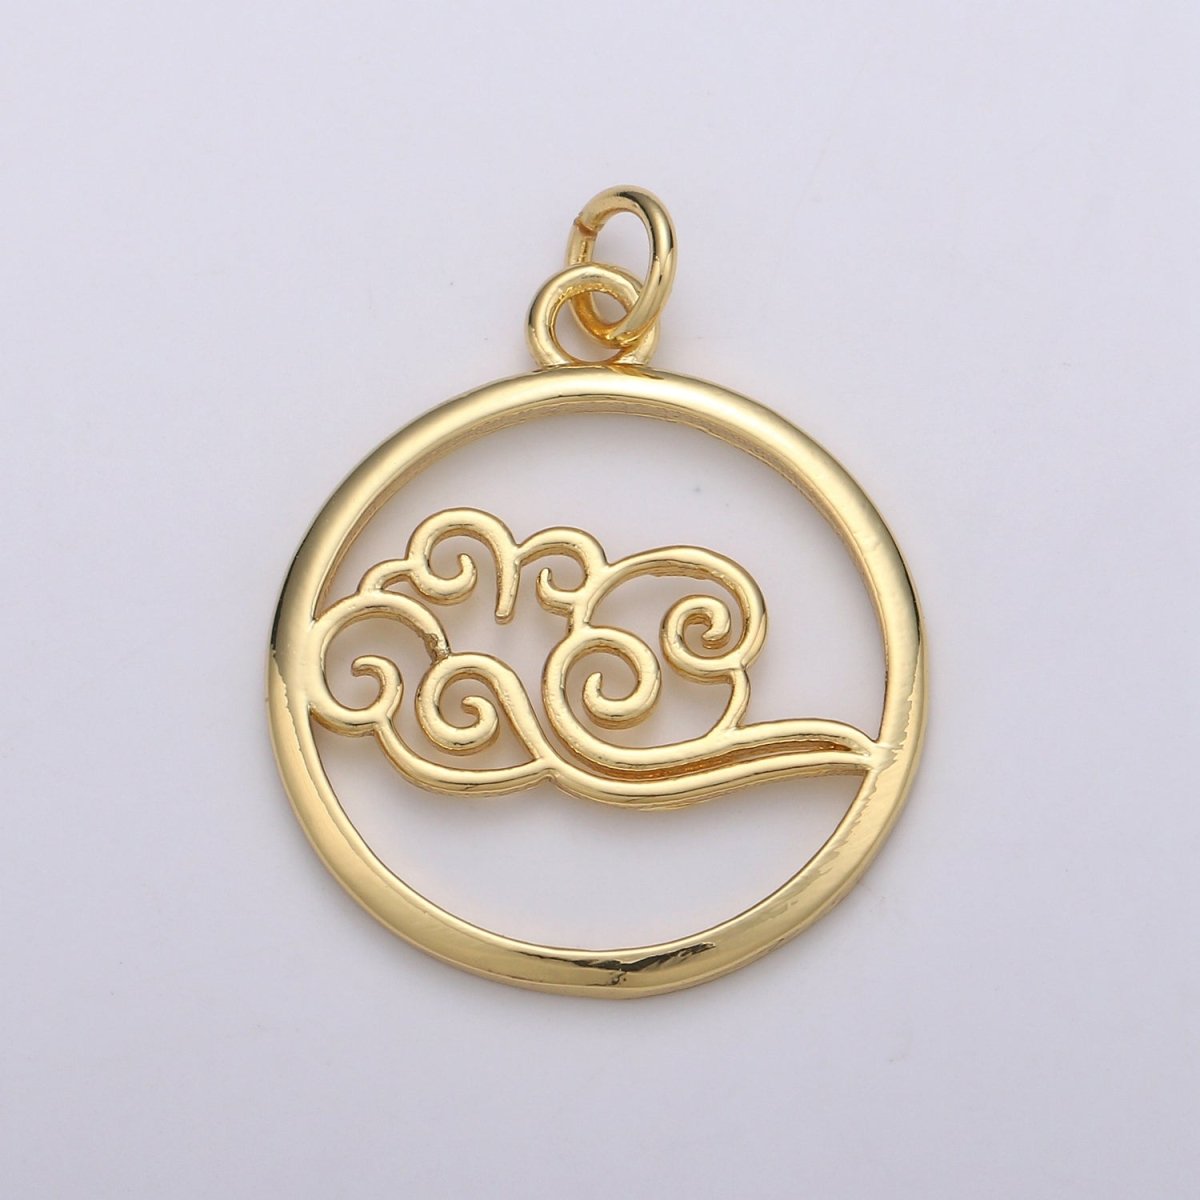 Dainty Gold Element Charm Fire Wind Earth Ocean Wave Charm. 24K Gold Filled Charm for Bracelet Necklace Earring Supply D-915 D-923 - D-925 - DLUXCA